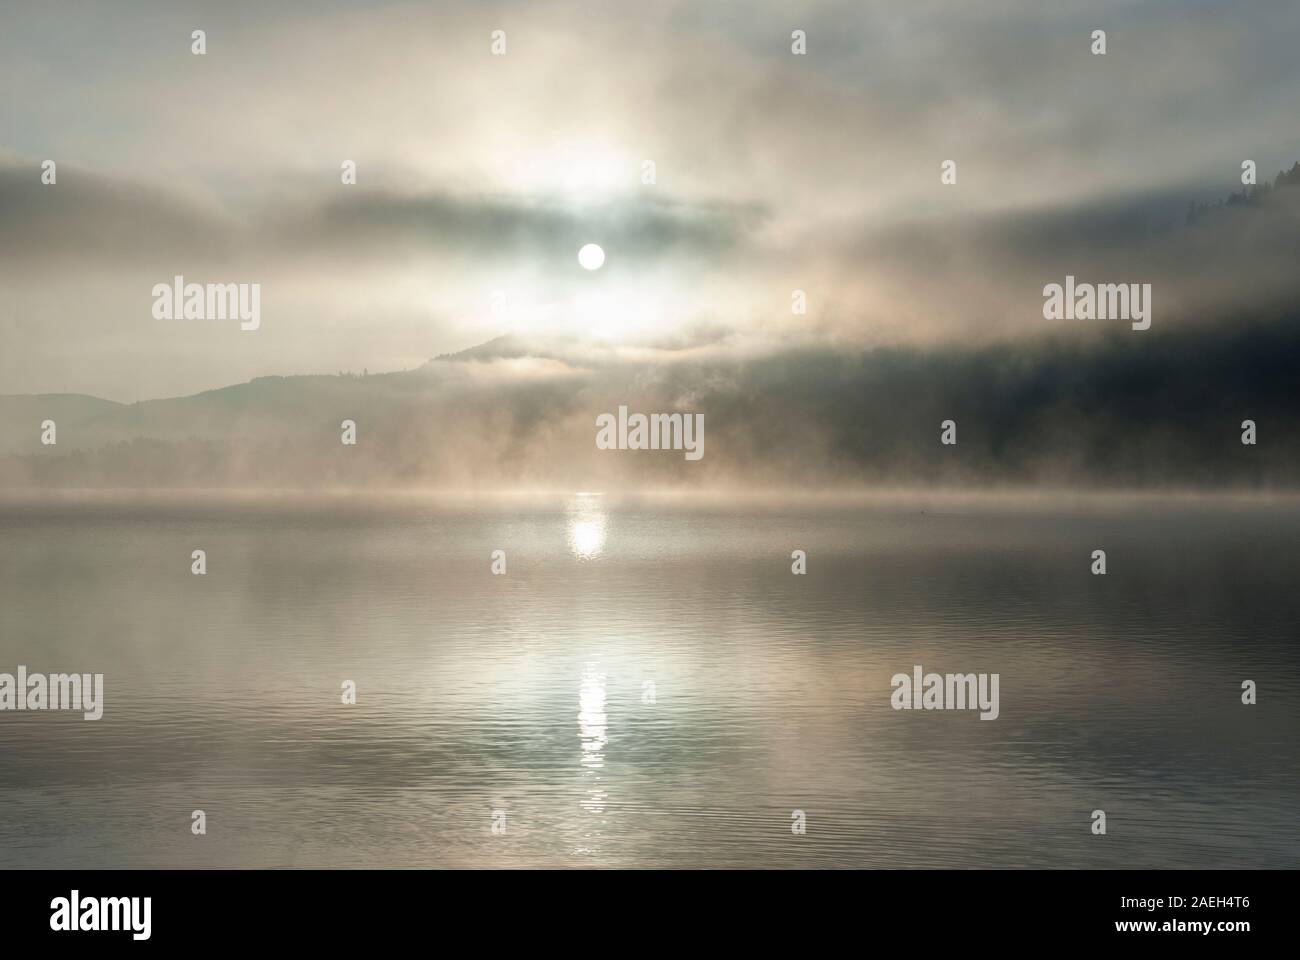 Ground fog above the water, early morning lake at sunrise, Titisee, Germany Stock Photo